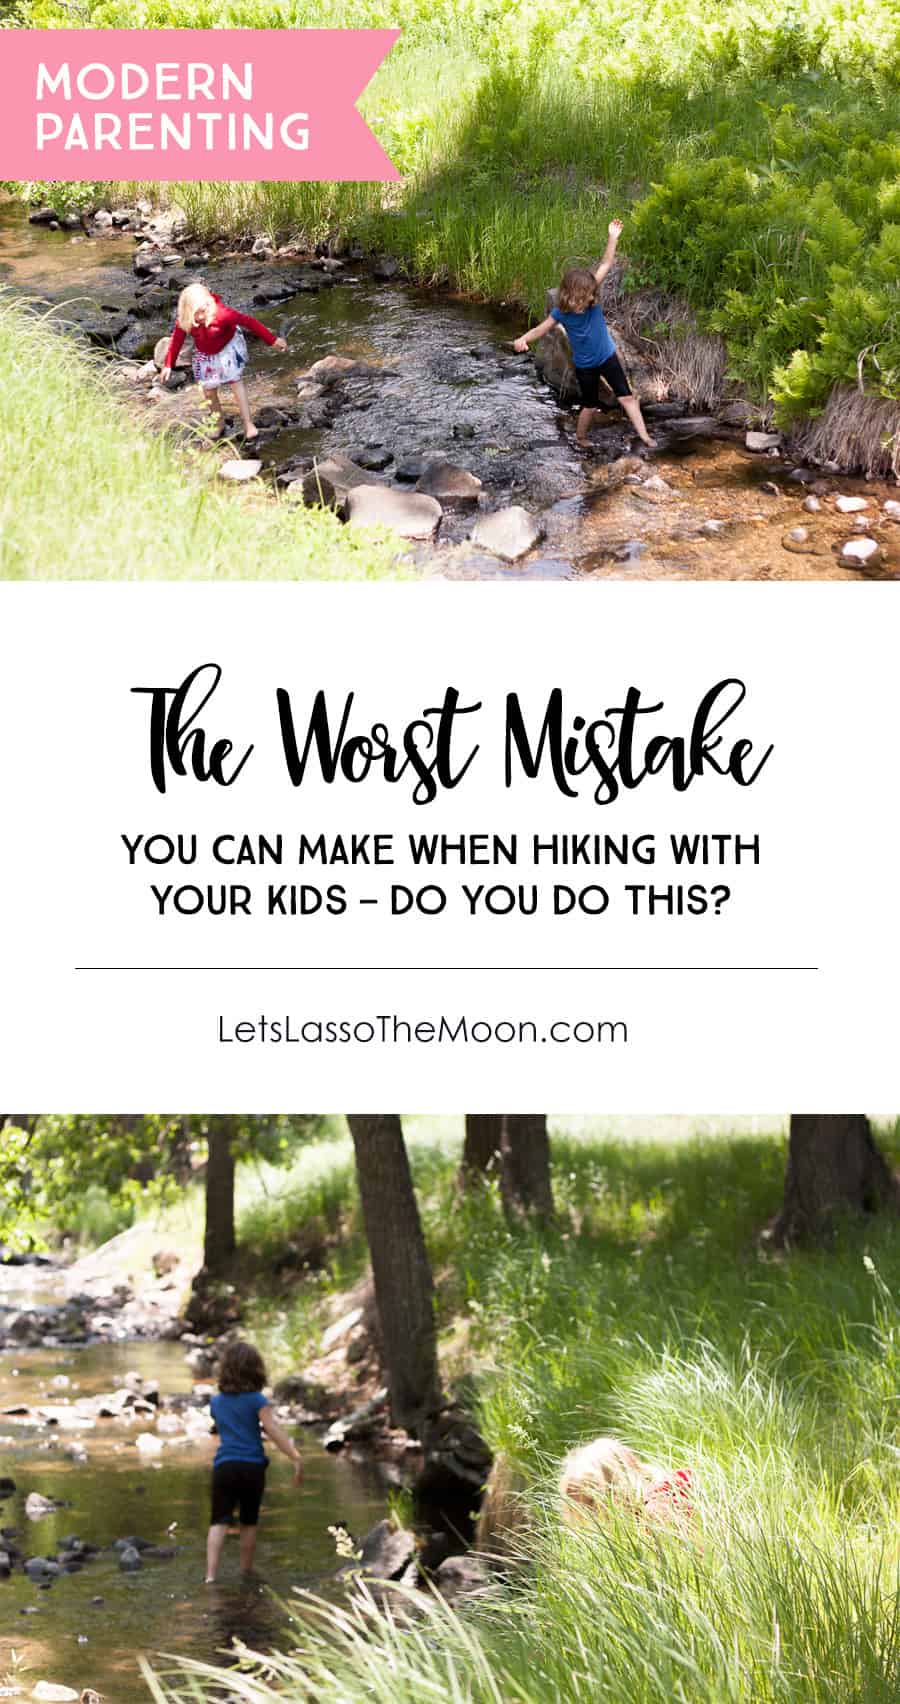 The worst mistake you can make when hiking with kids ... This is a great read for parents.